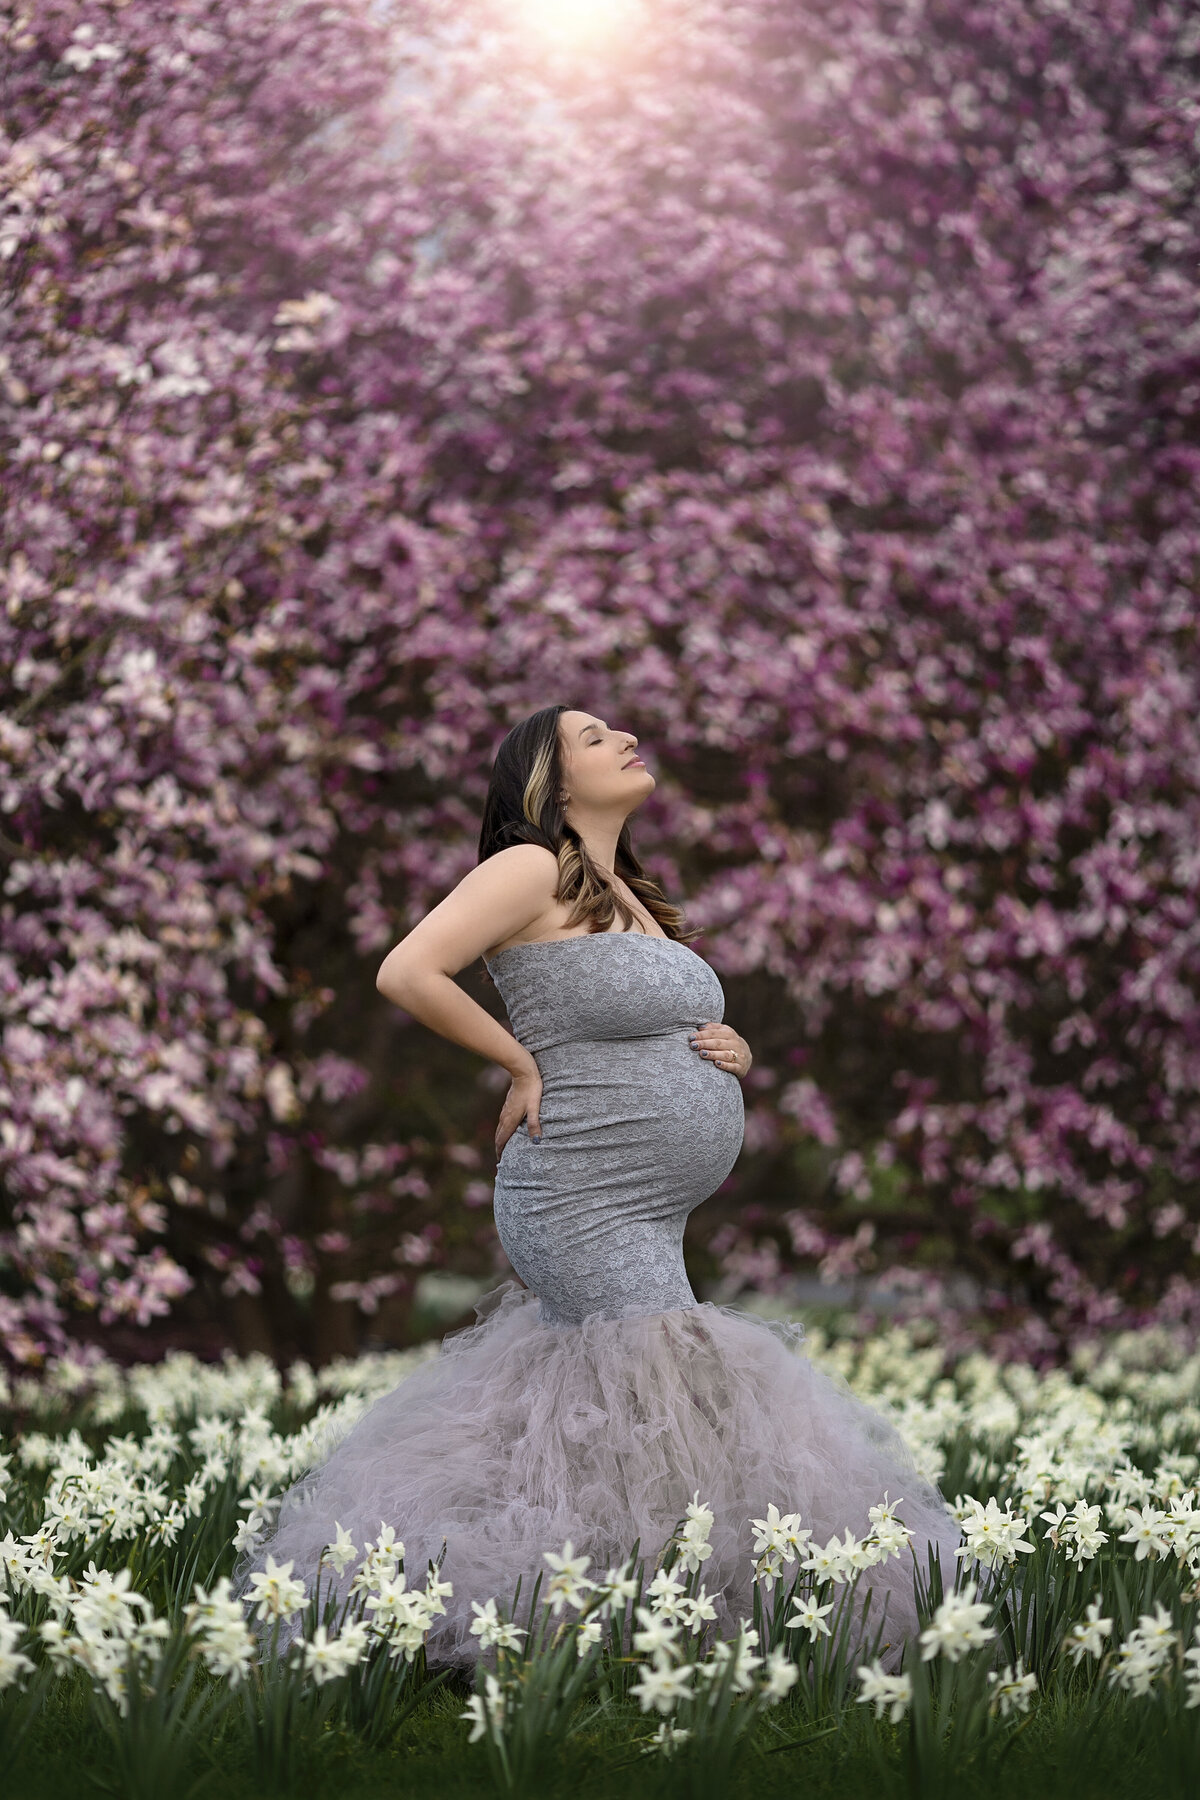 A mother to be stands in a field of wildflowers and blooming trees in a blue/grey maternity gown smiling up to the sun